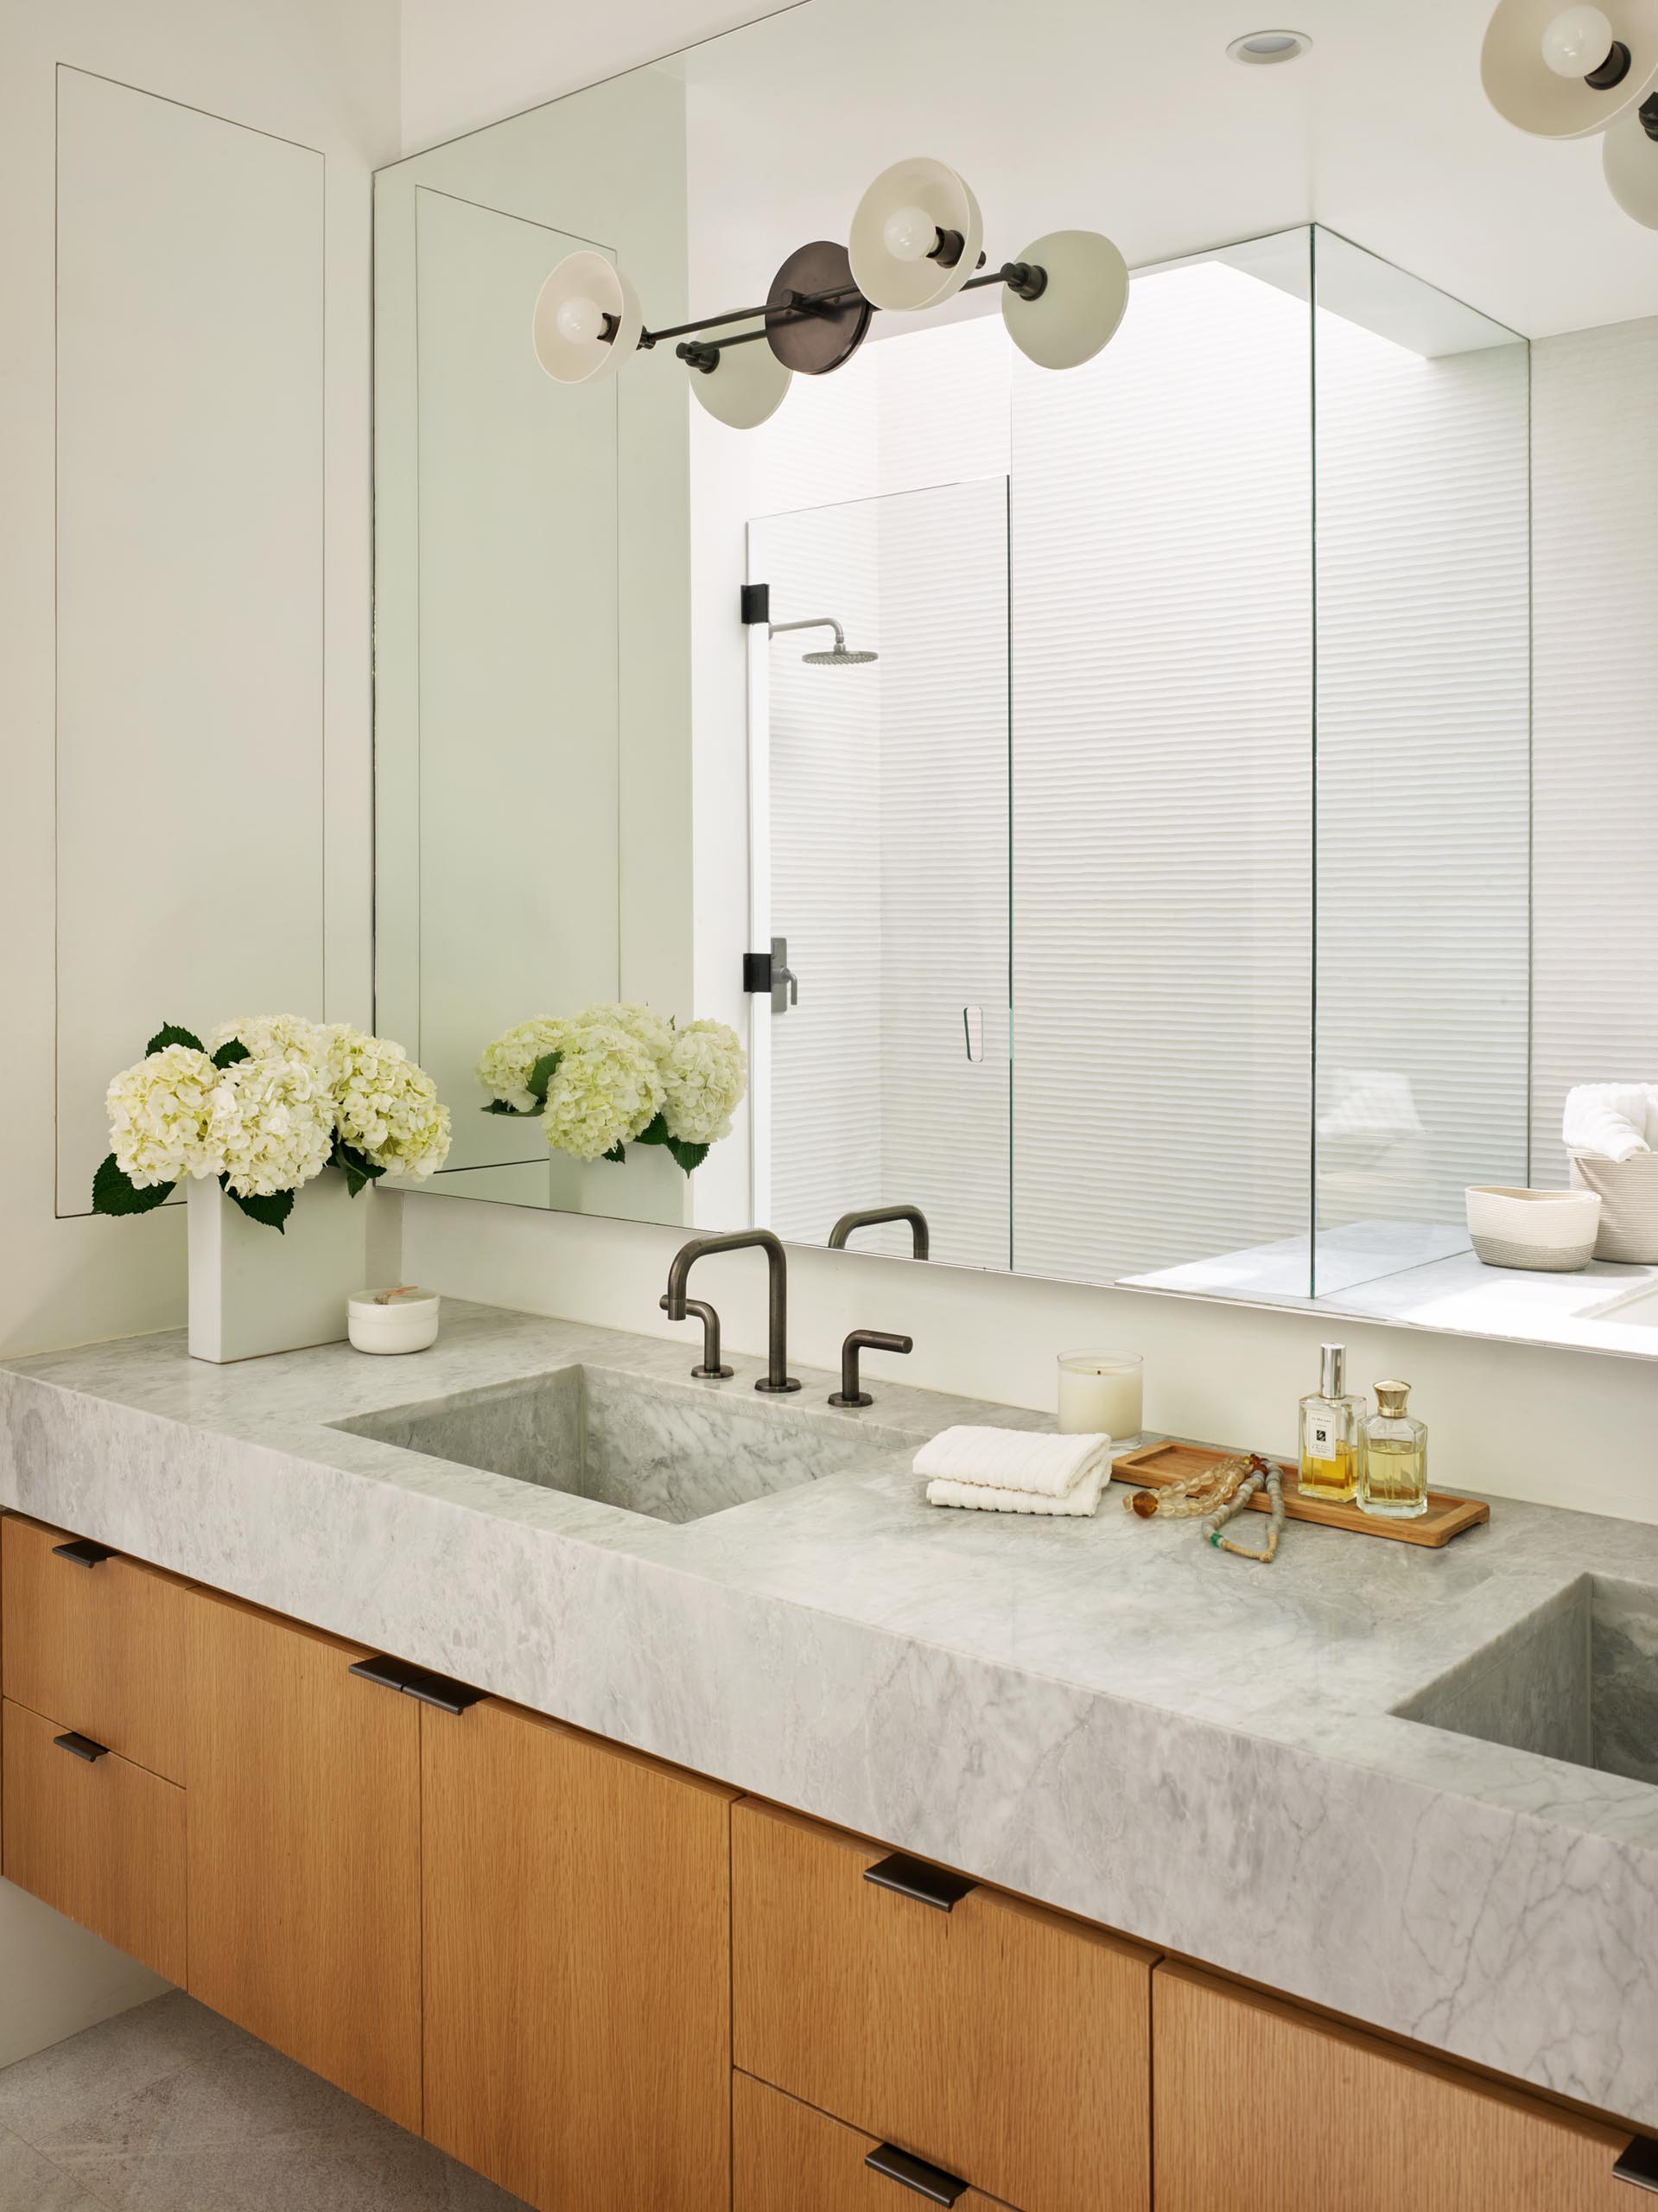 A master bathroom with a marble counter that has built-in sinks and sits on top of a wood vanity.